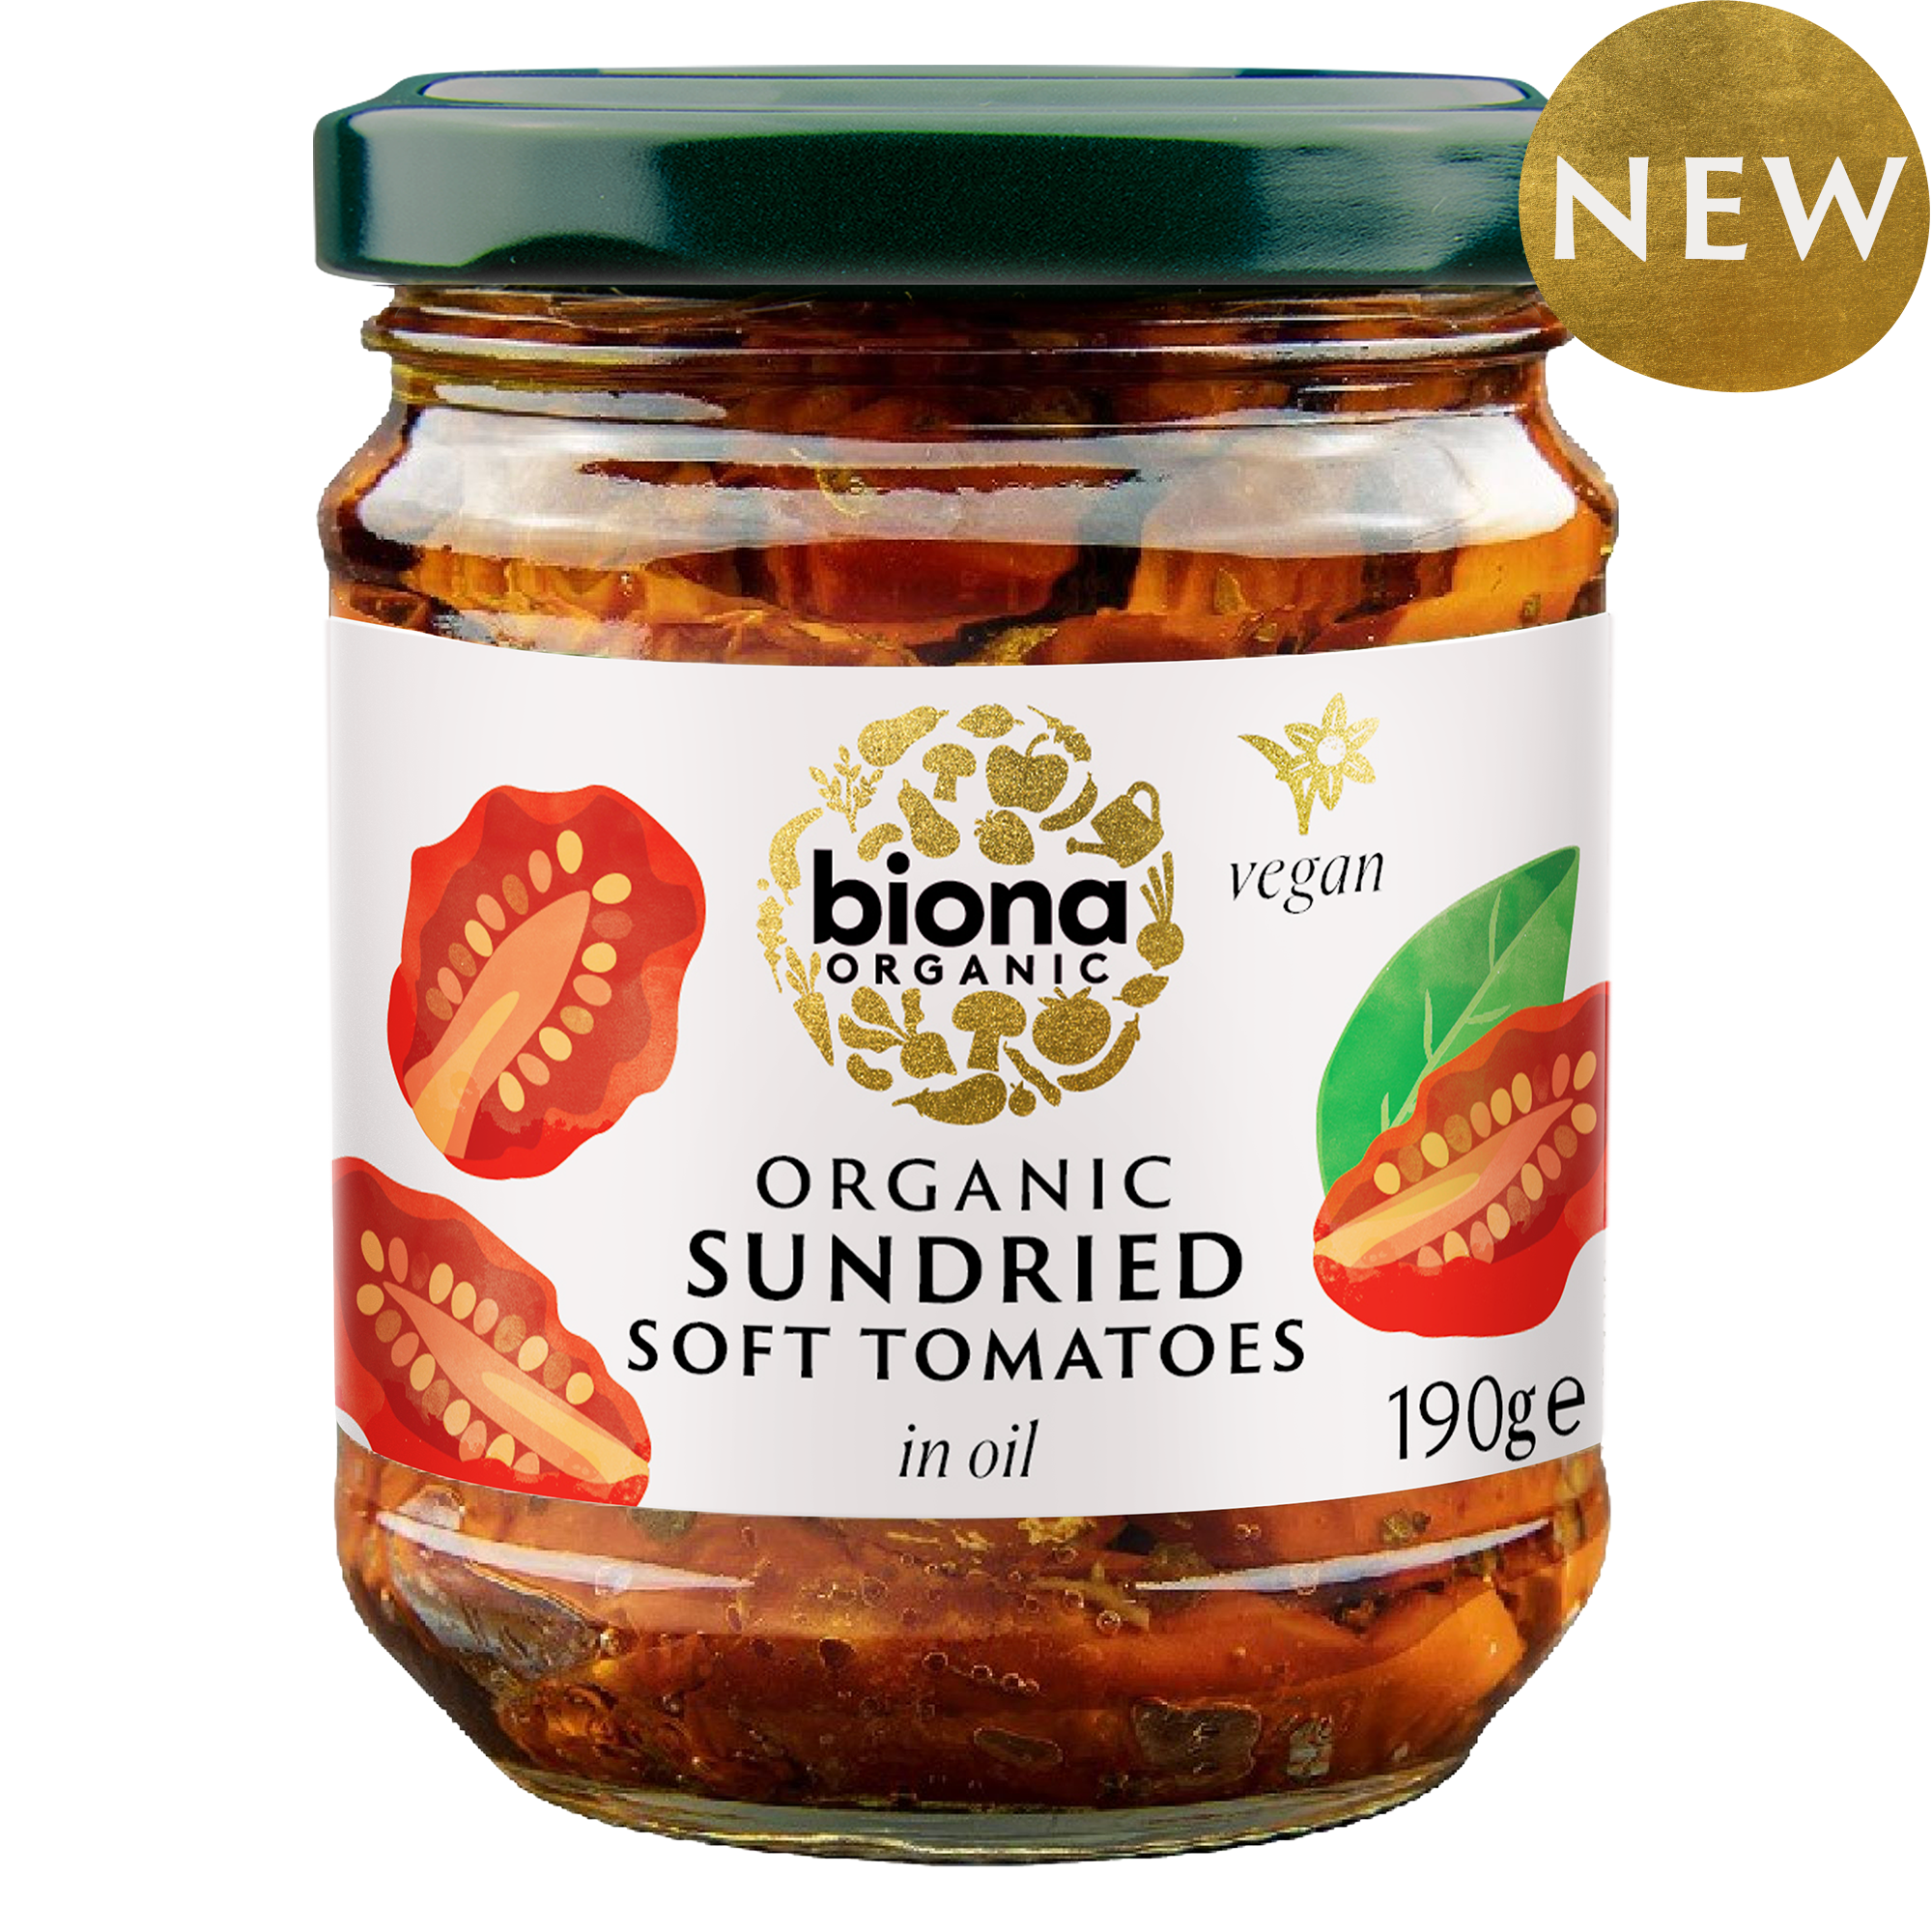 SUNDRIED SOFT TOMATOES IN OIL